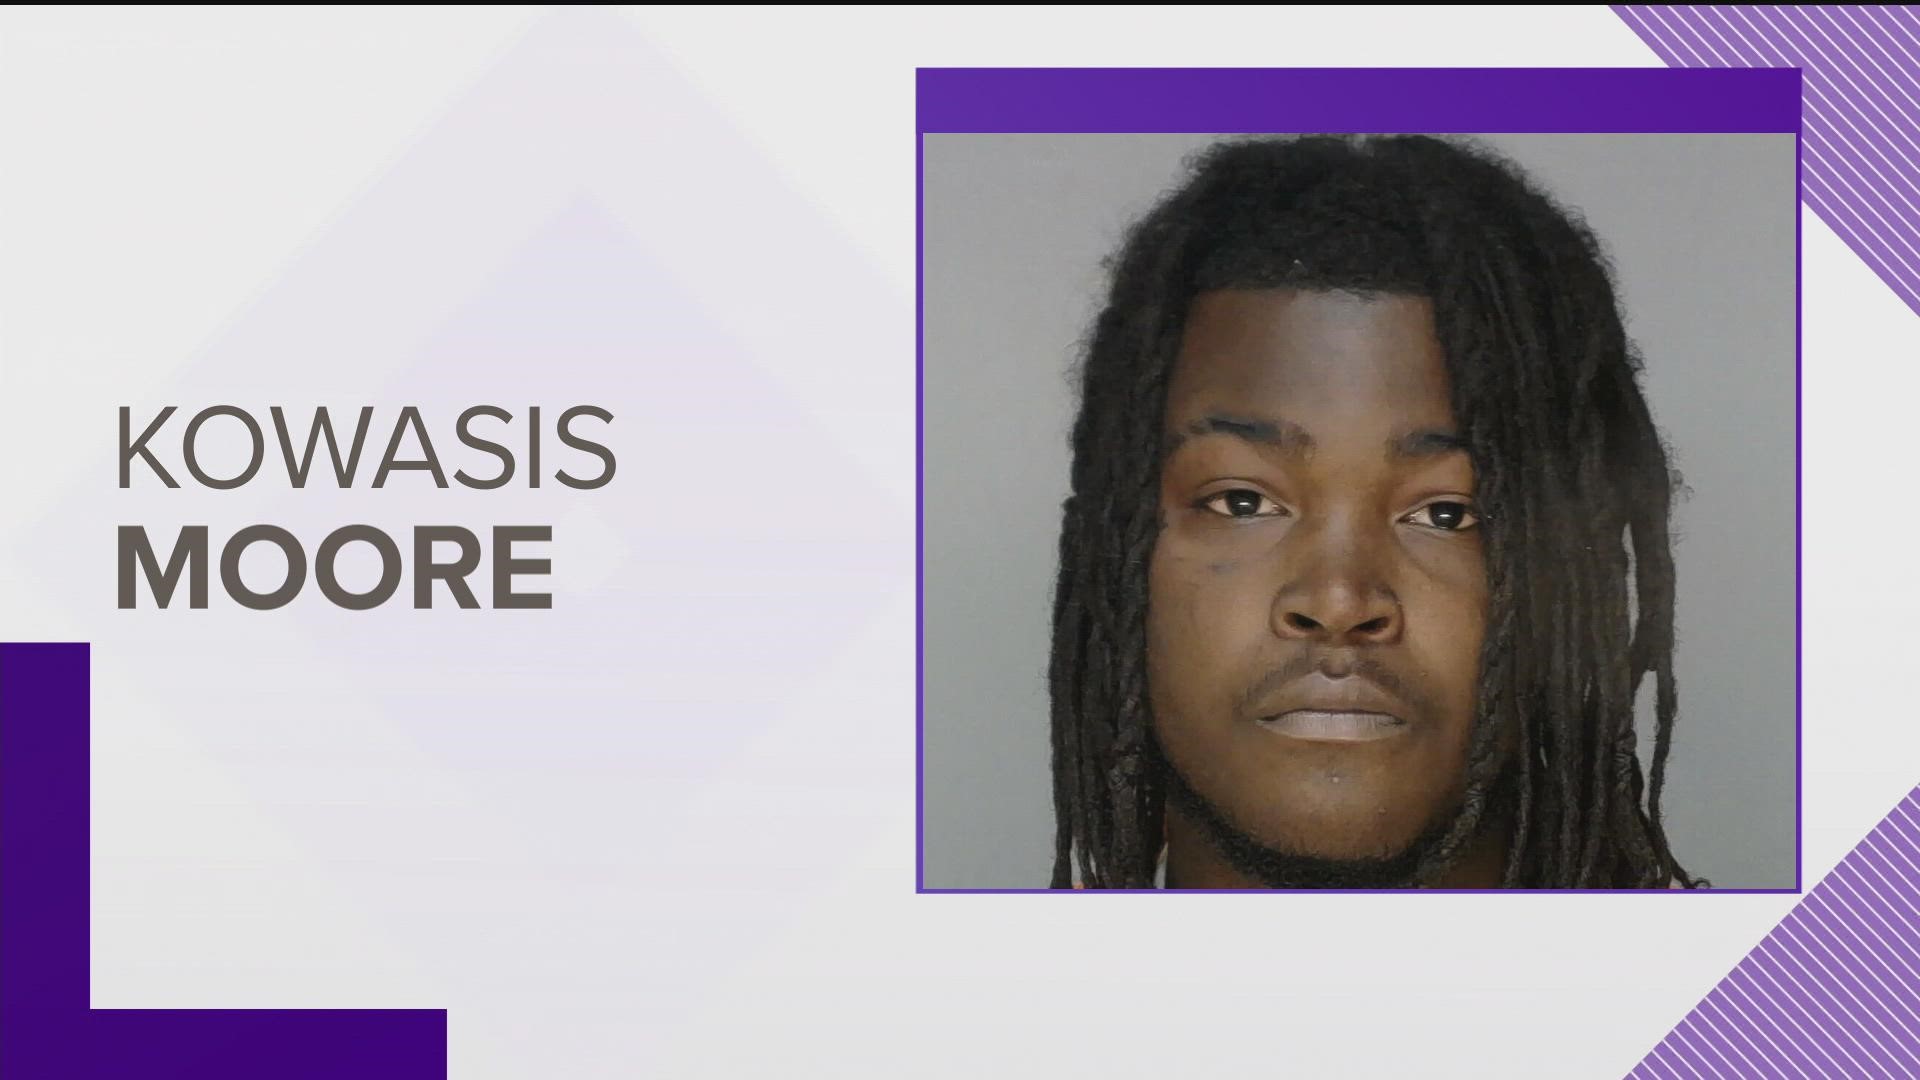 19-year-old Kowasis Moore, the brother of Quentavious Moore, was arrested Tuesday